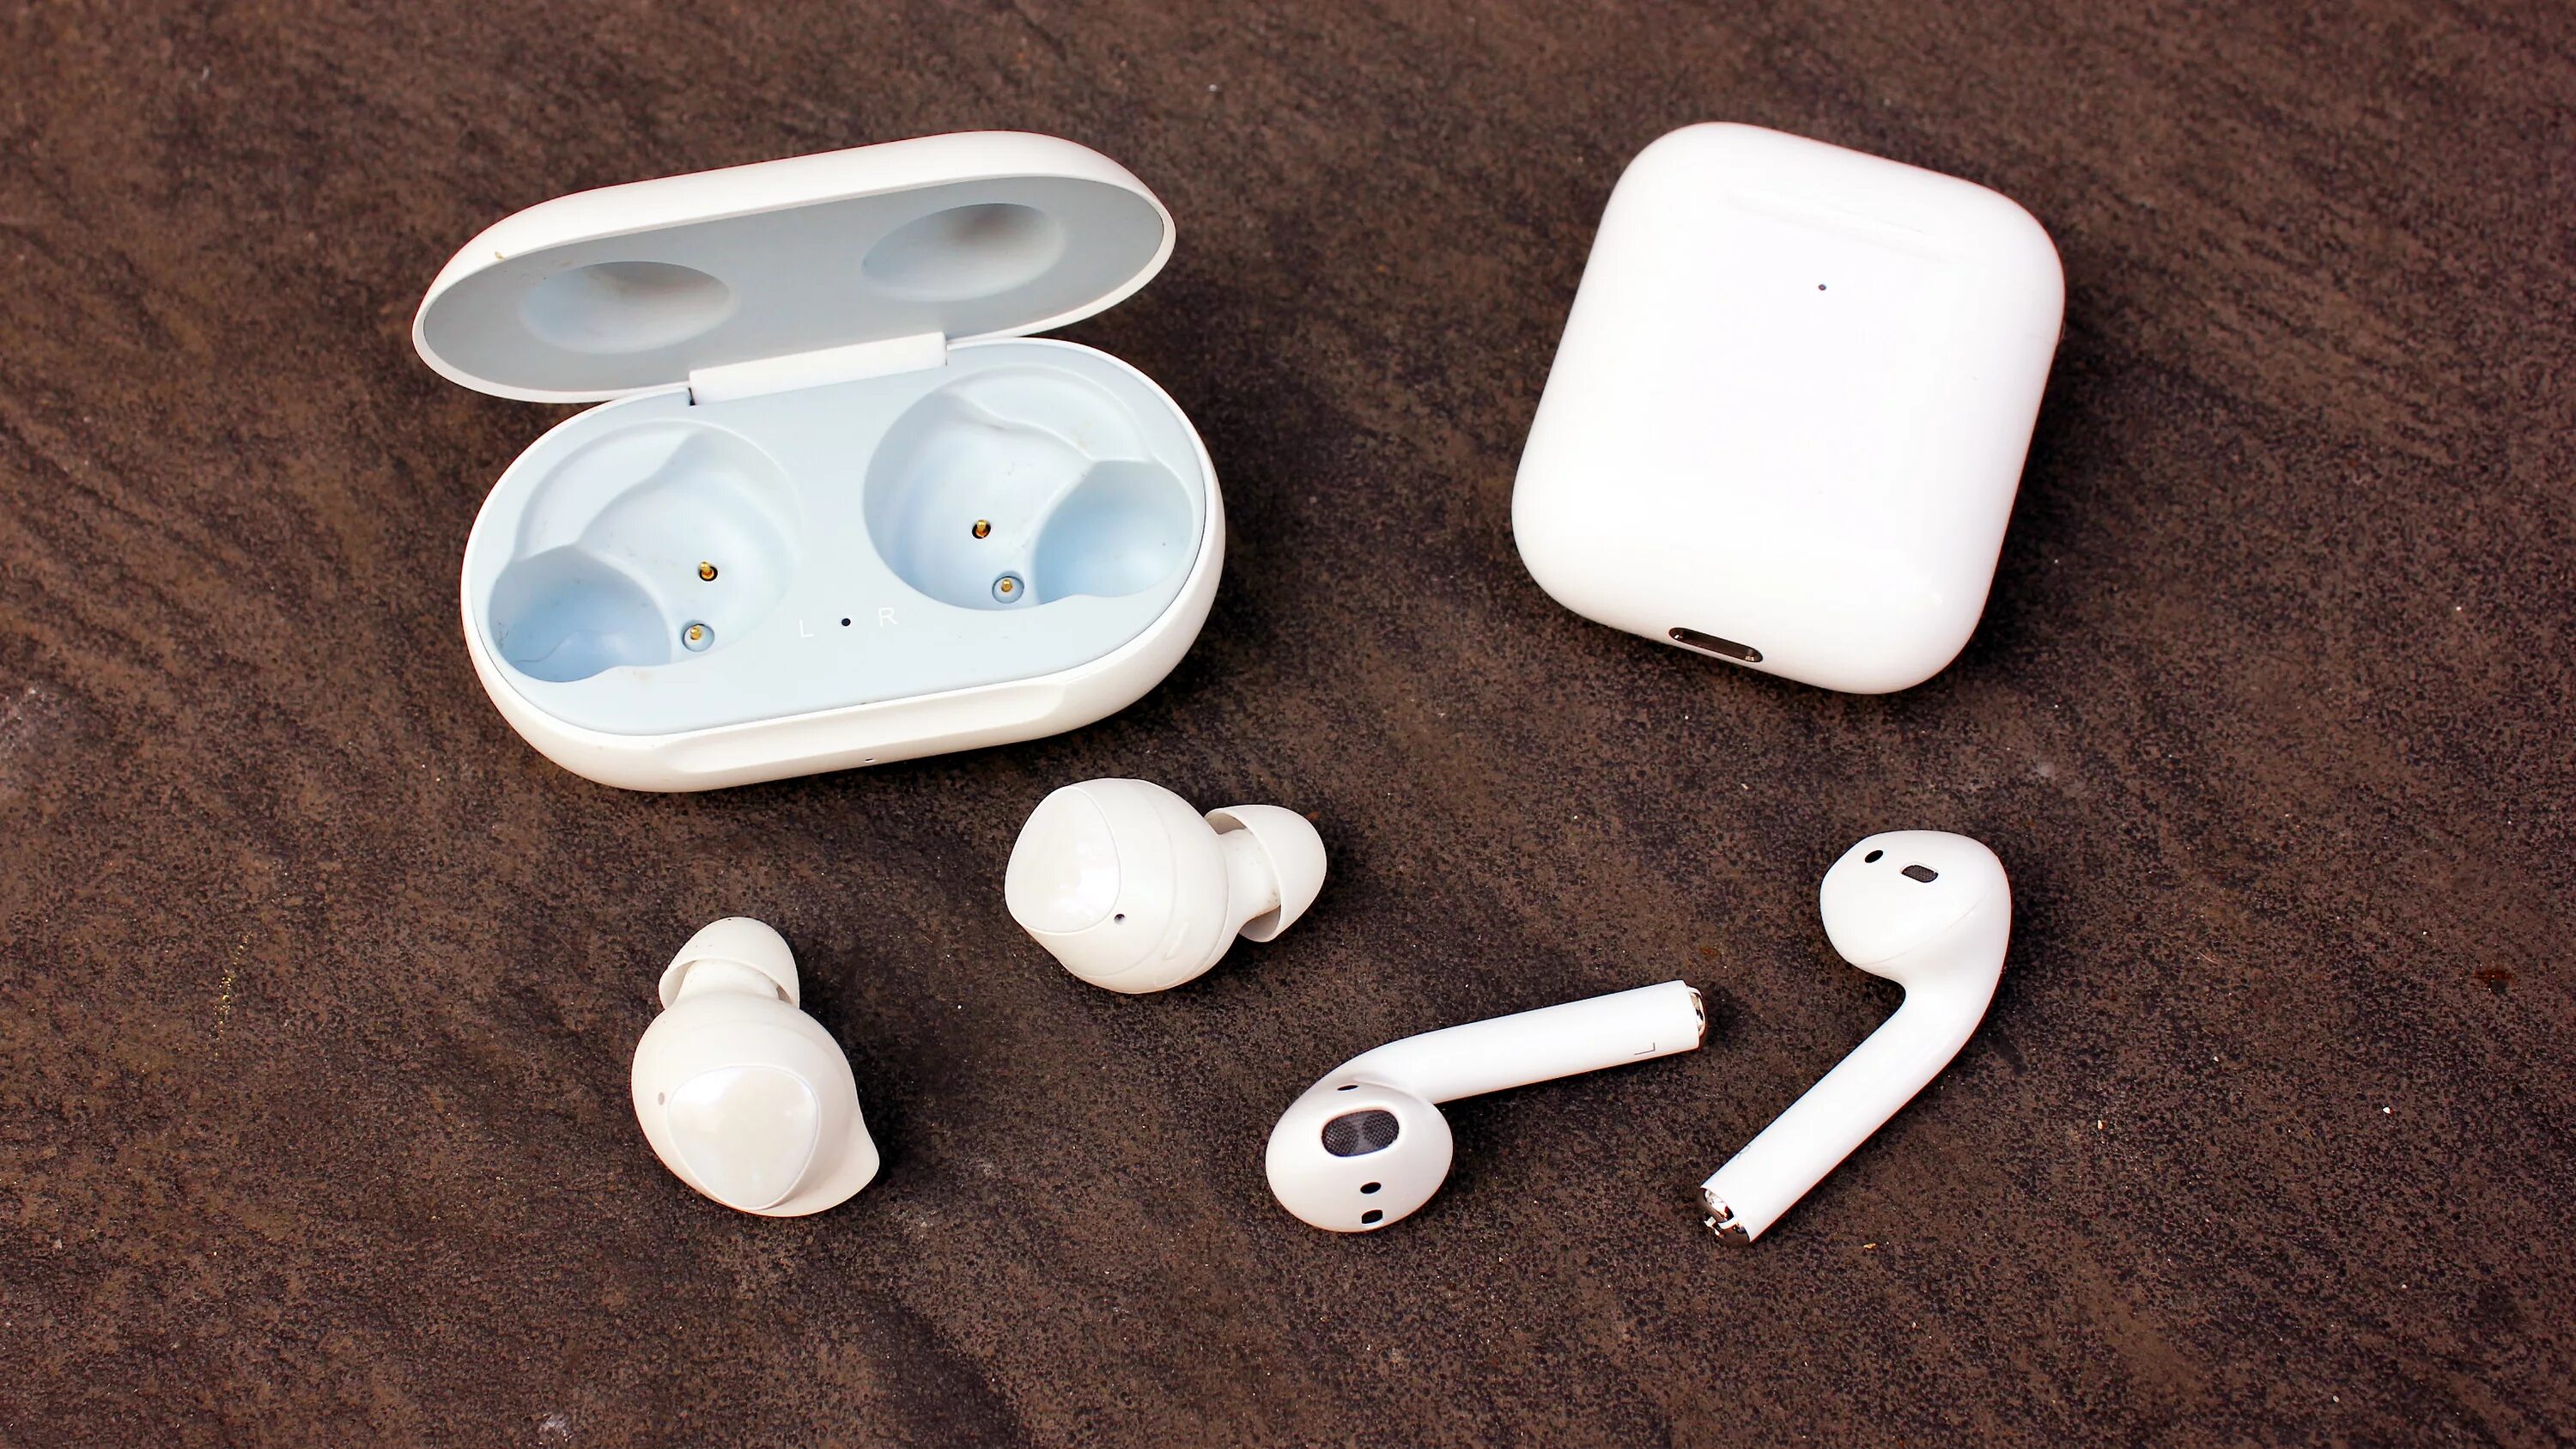 Airpods vs buds. Samsung AIRPODS. Apple AIRPODS 4. Samsung AIRPODS 2. AIRPODS Samsung Galaxy Buds 2.